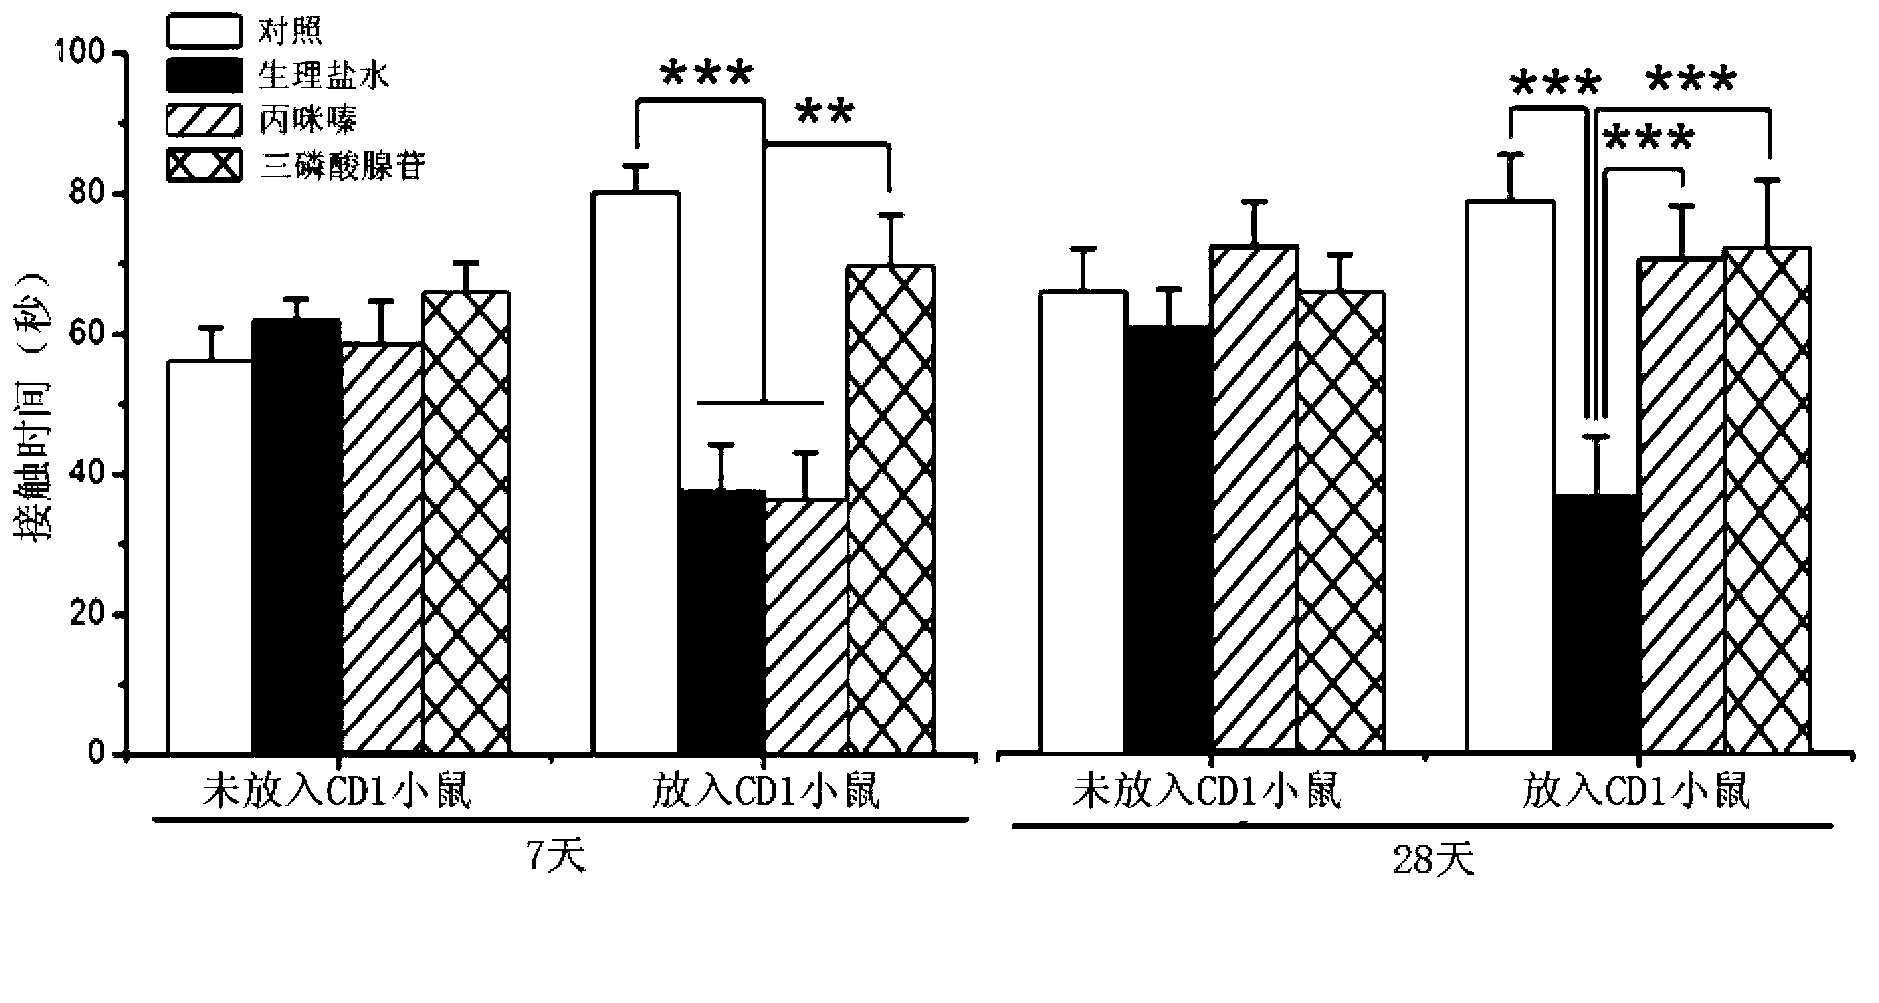 Application of P2X2 receptor agonist or opening agent in preparation of anti-depression or anti-anxiety drugs